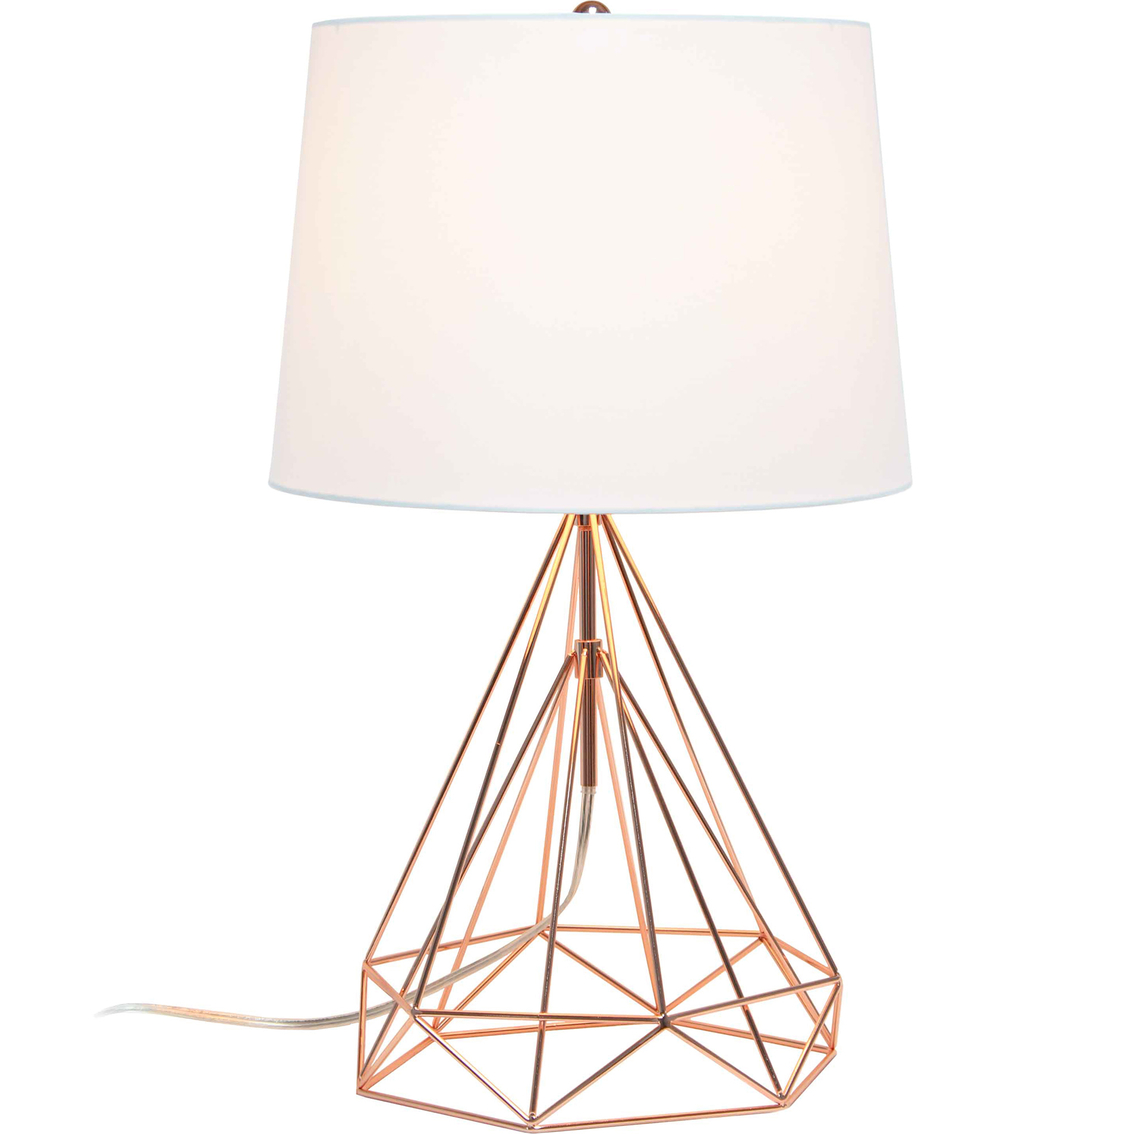 Lalia Home 23.5 in. Geometric Matte Wired Table Lamp with Fabric Shade - Image 2 of 8